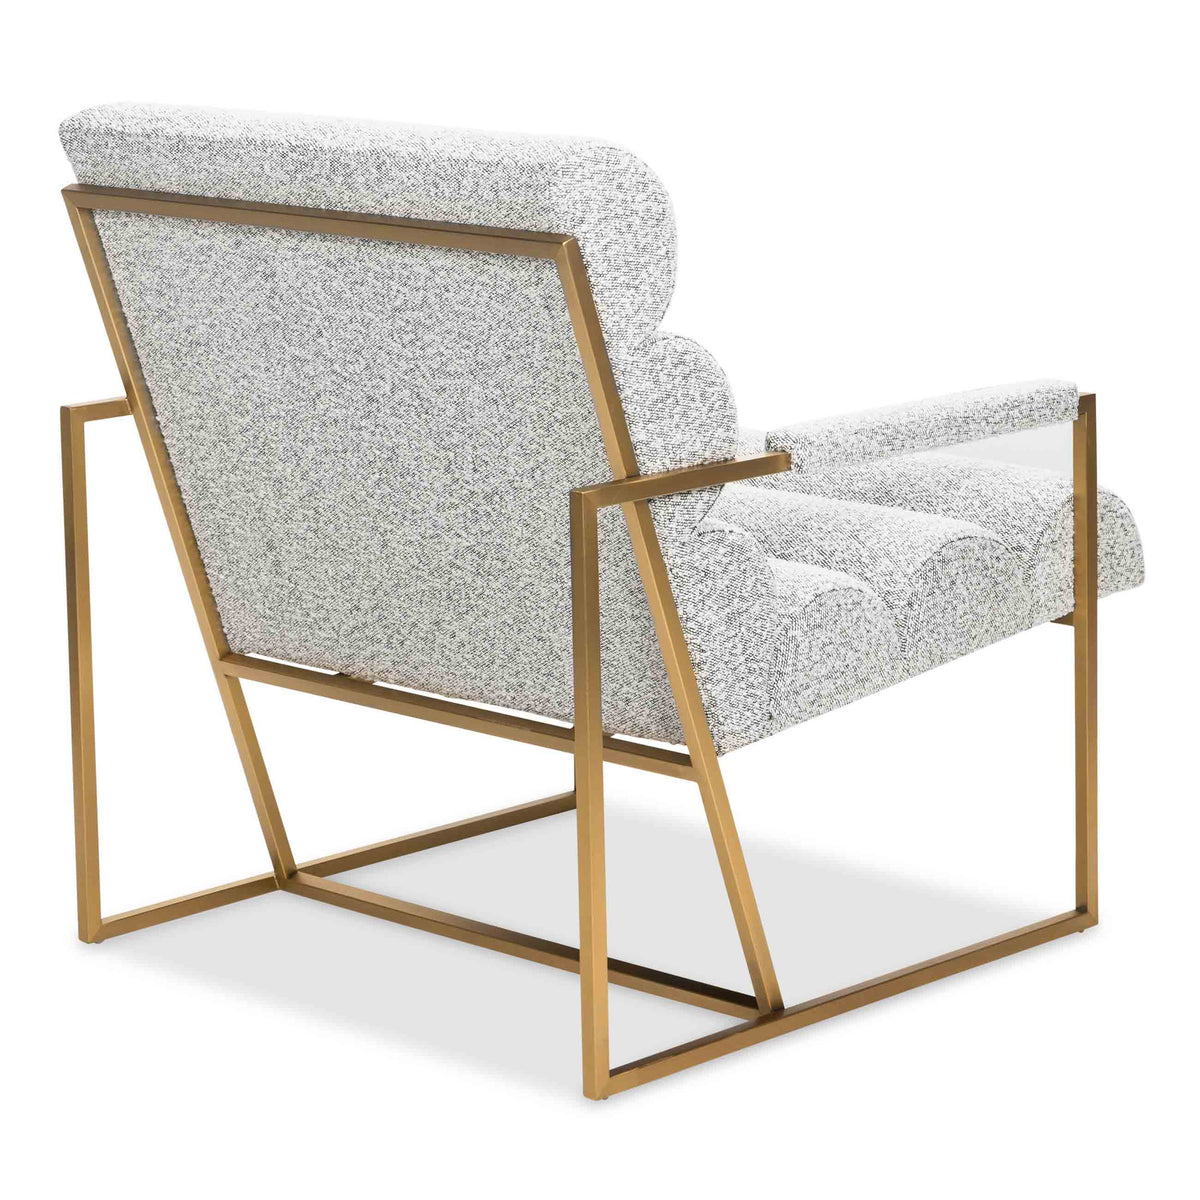 Milos Occasional Chair in Boucle